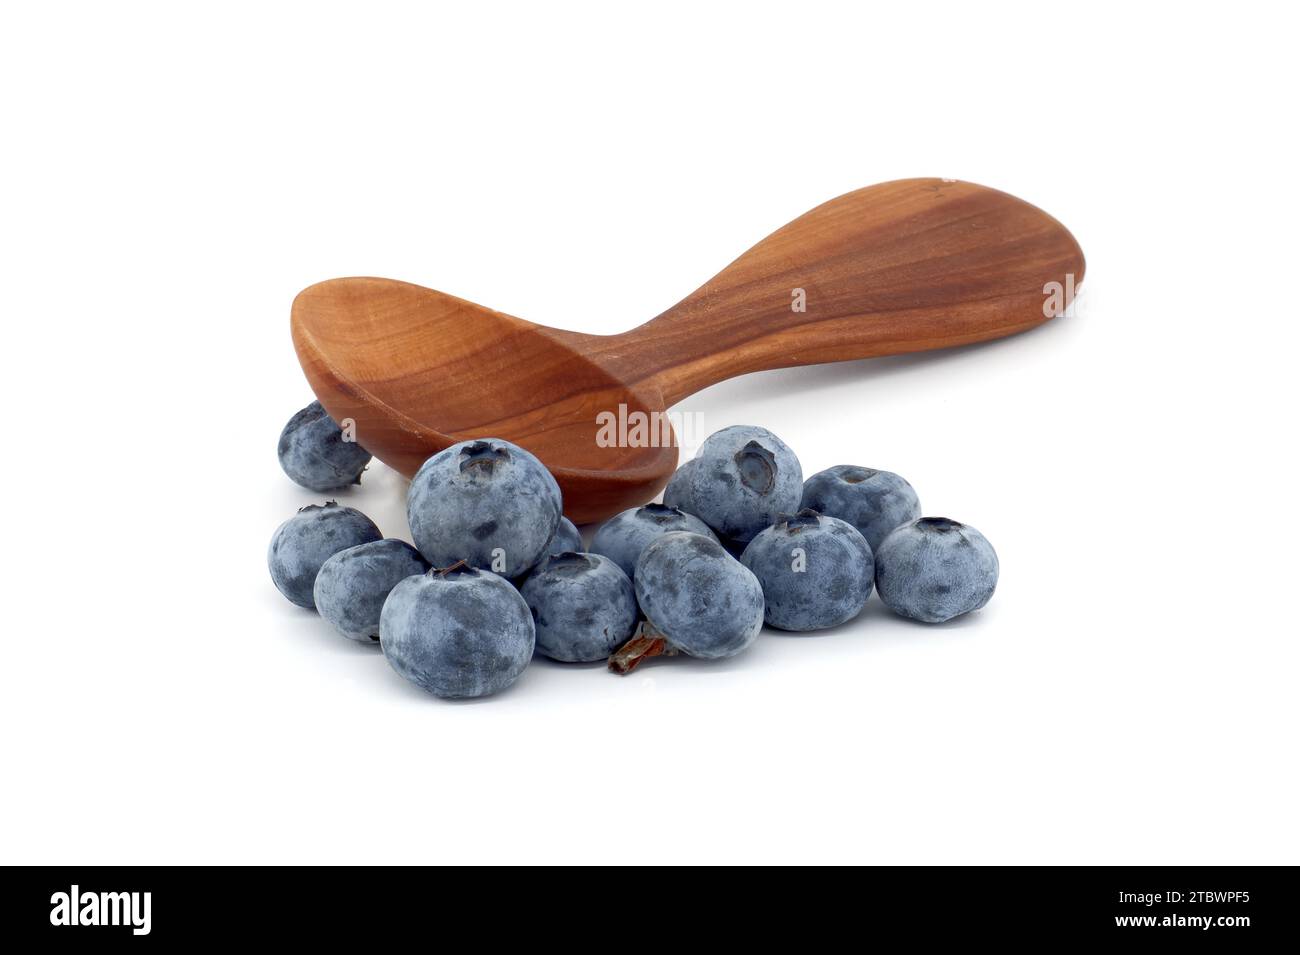 Blueberries near wooden spoon isolated on white background, full depth of field Stock Photo